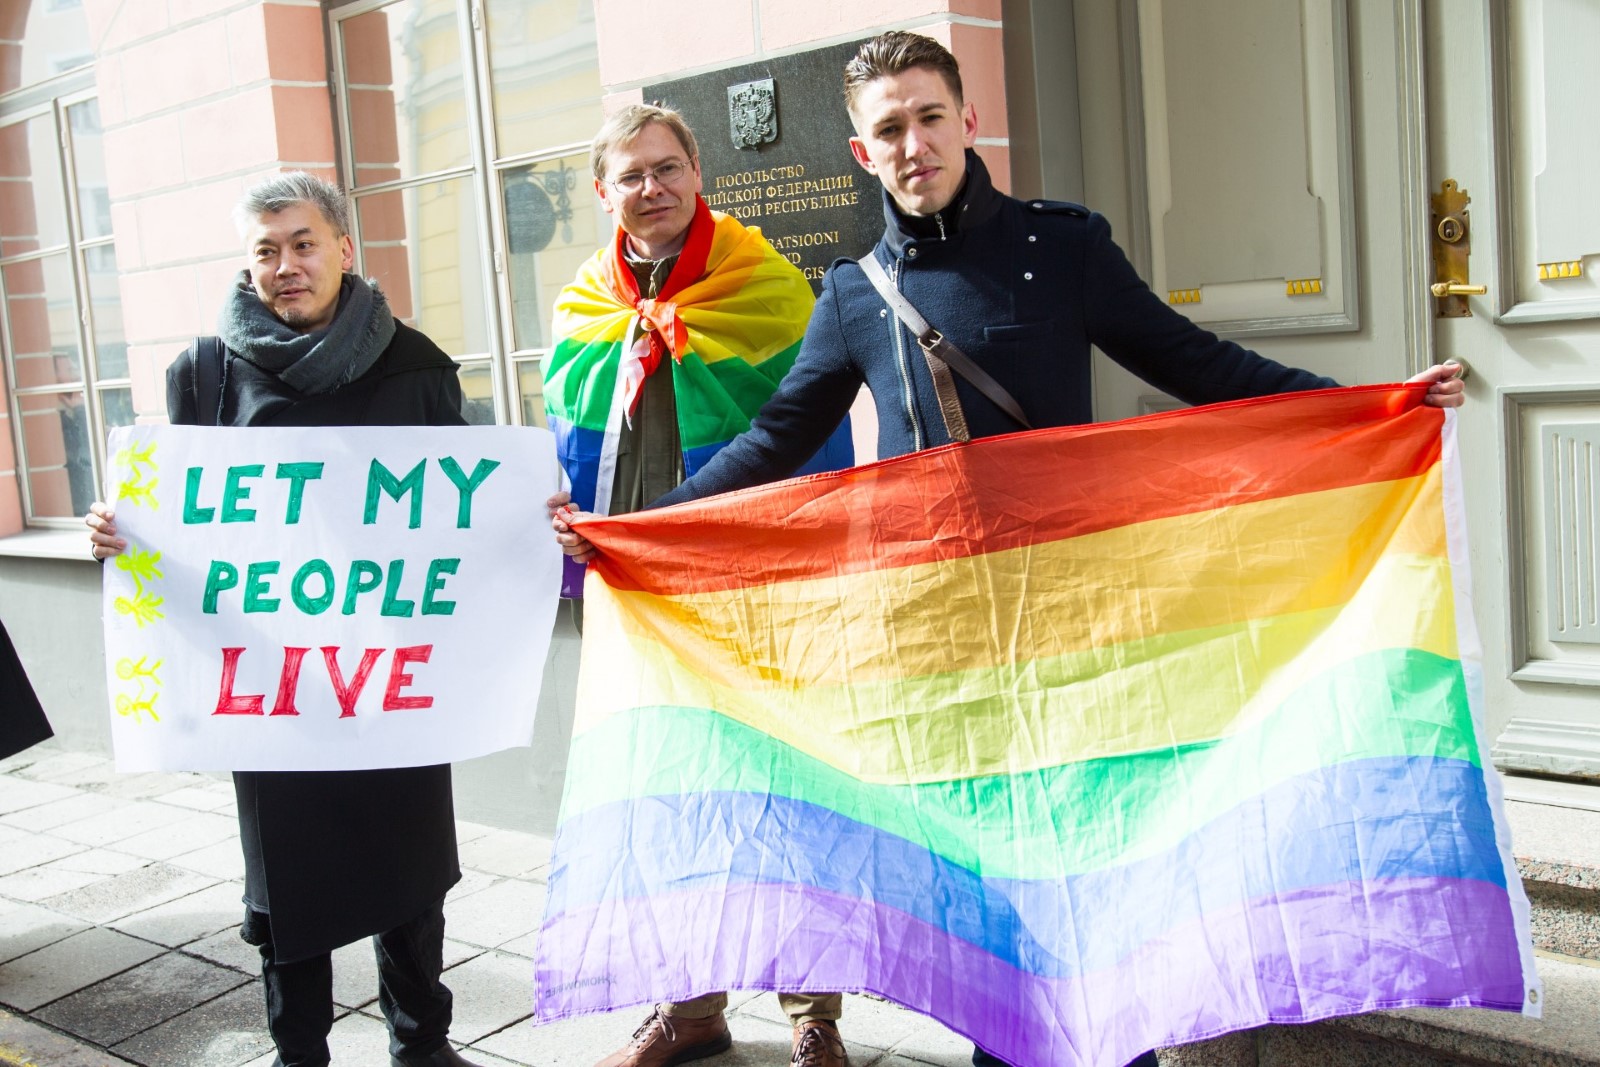 ECOM’s Statement on Repressions against Gay Men in Chechnya